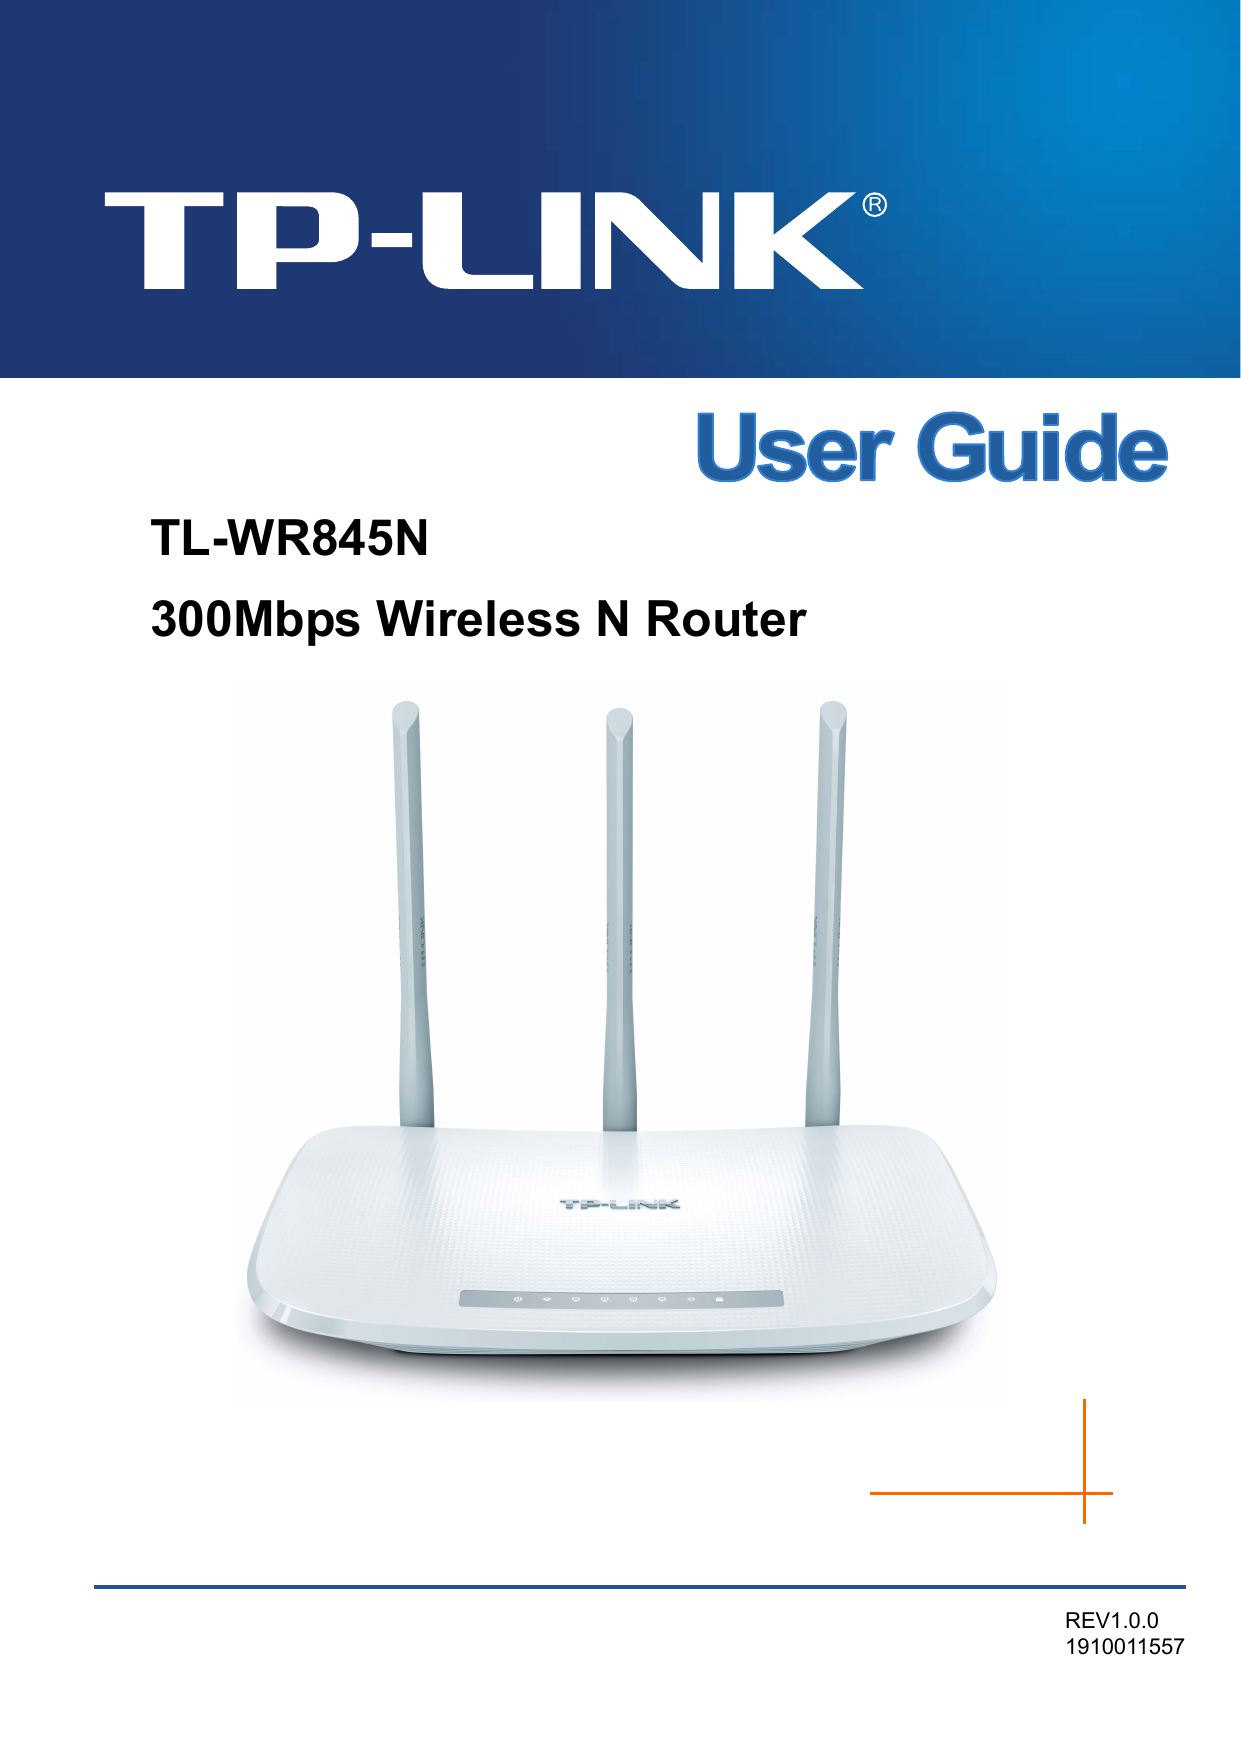   TL-WR845N 300Mbps Wireless N Router   REV1.0.0 1910011557    